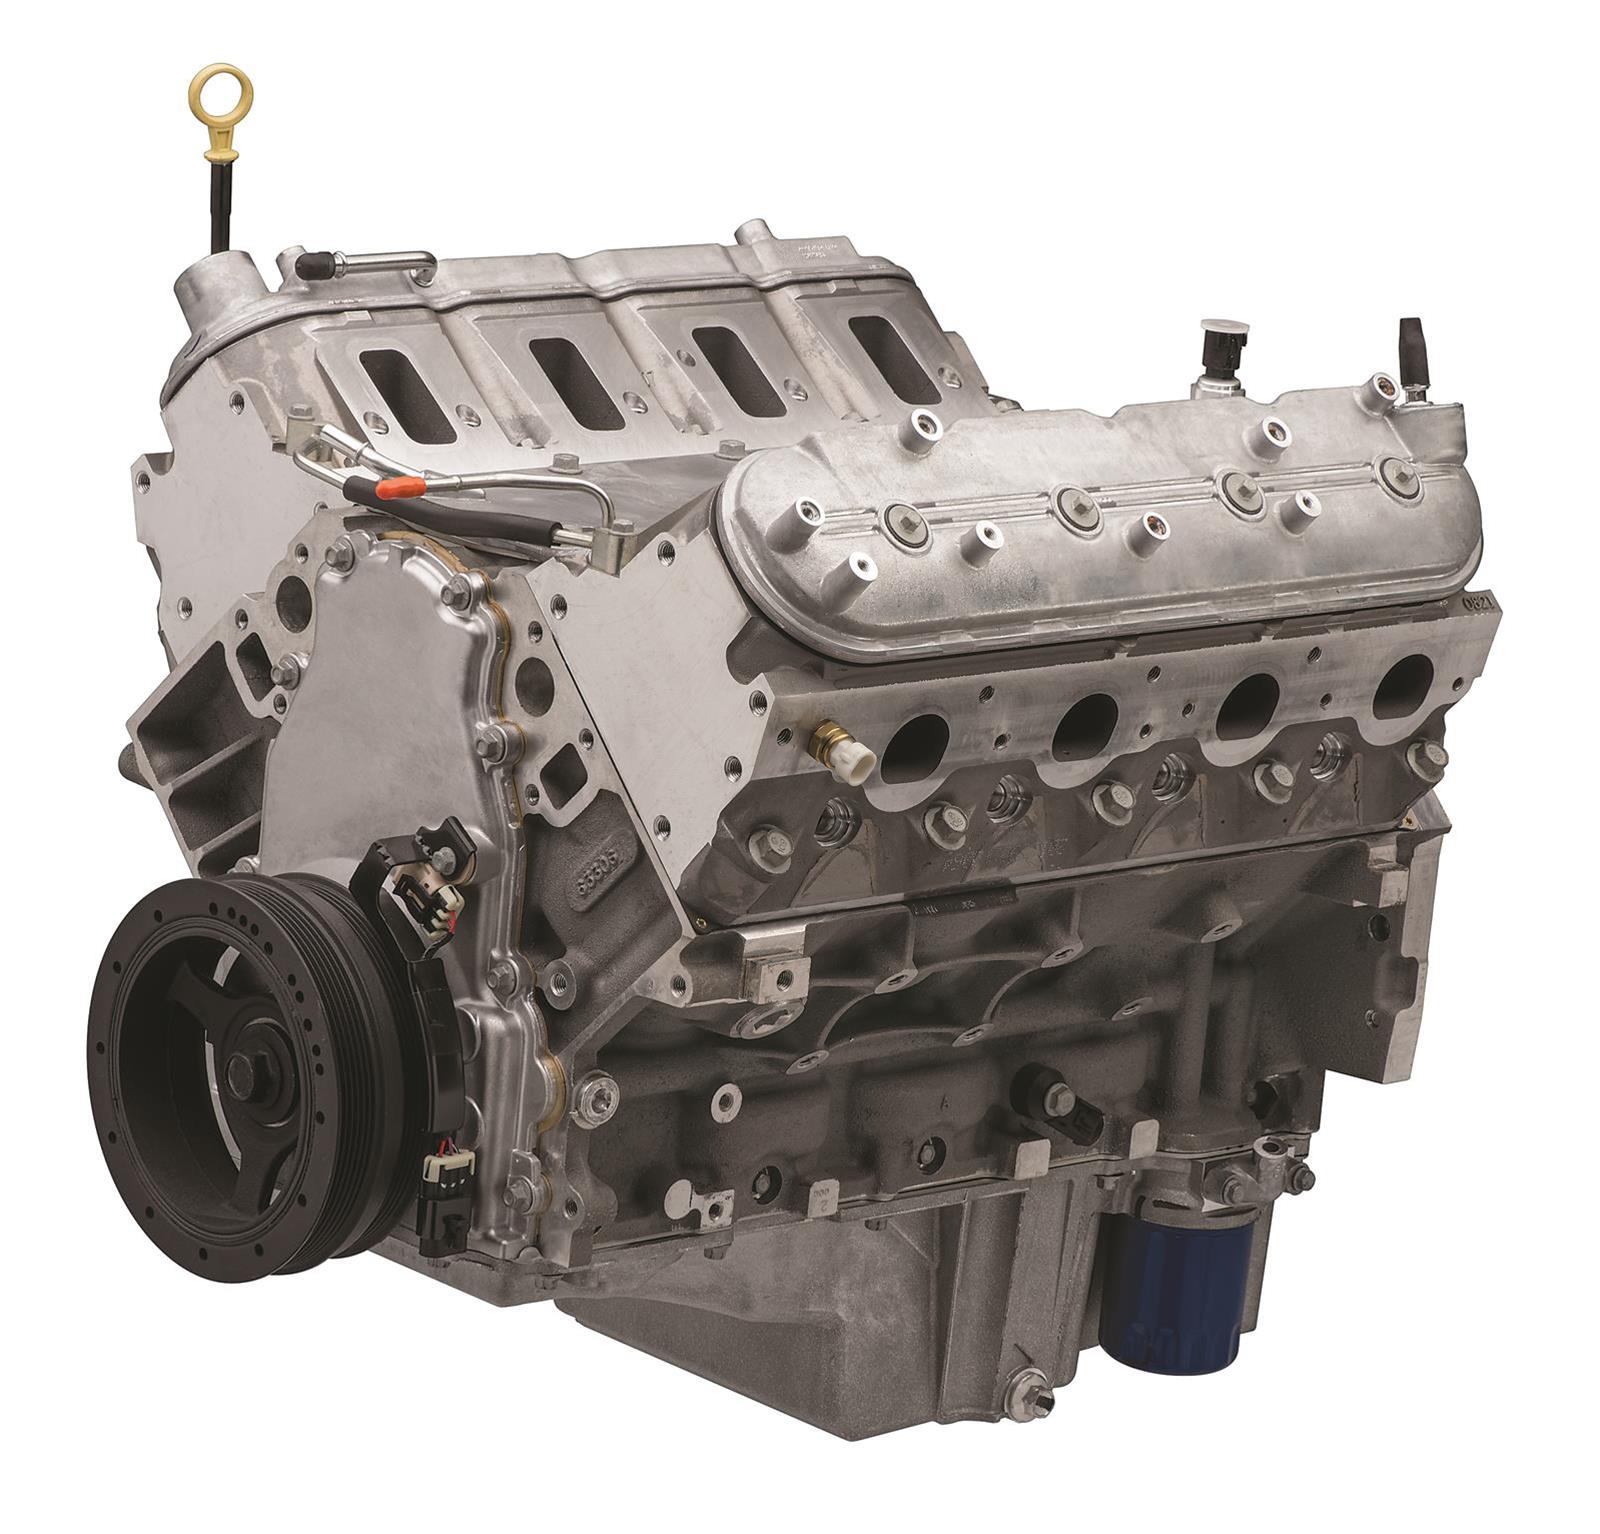 CHEVROLET PERFORMANCE 6.2L LS3 Crate Engine 430 HP